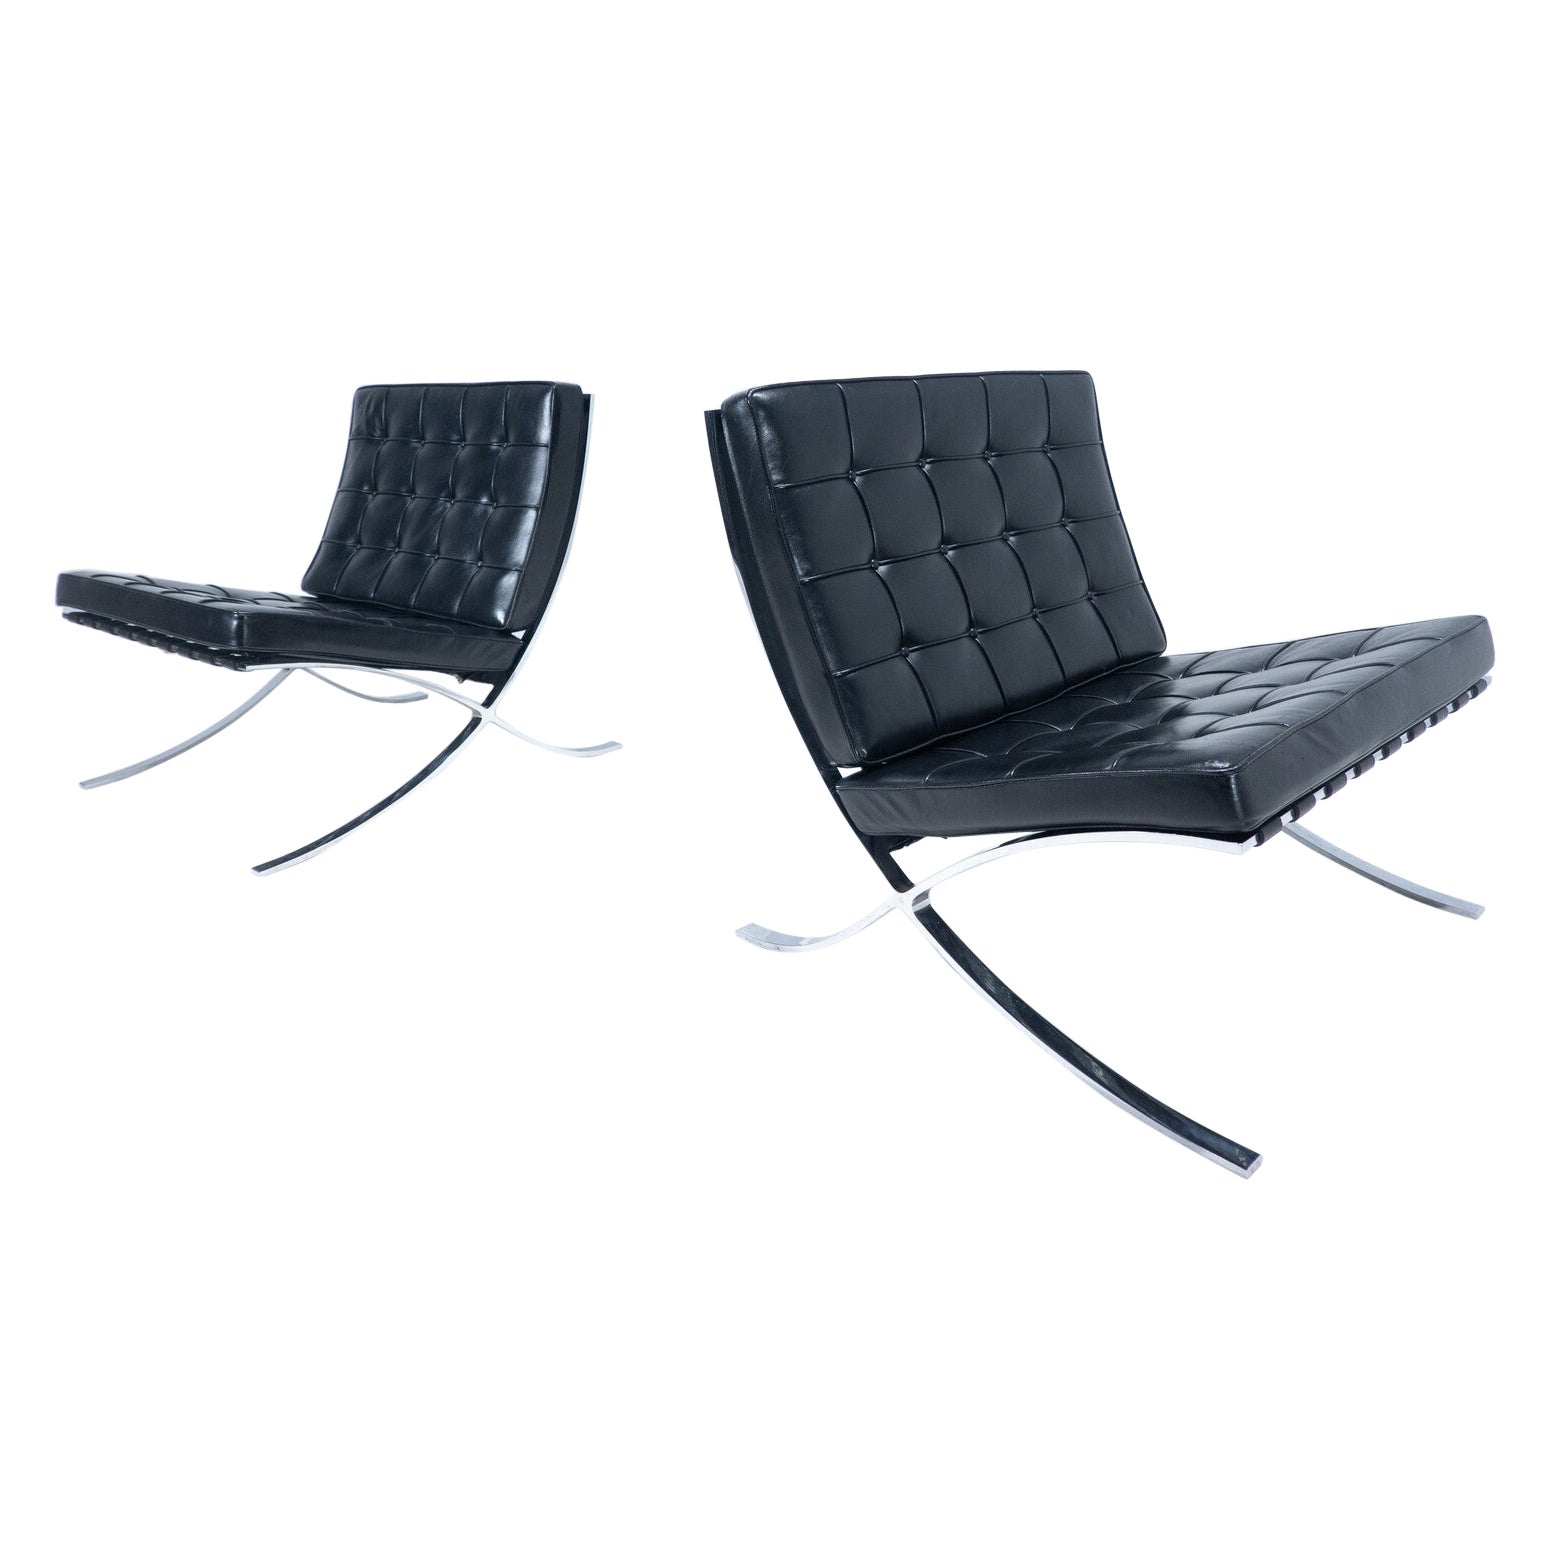 Pair of Black Leather Barcelona Chairs by Mies Van Der Rohe for Knoll, 1960s For Sale